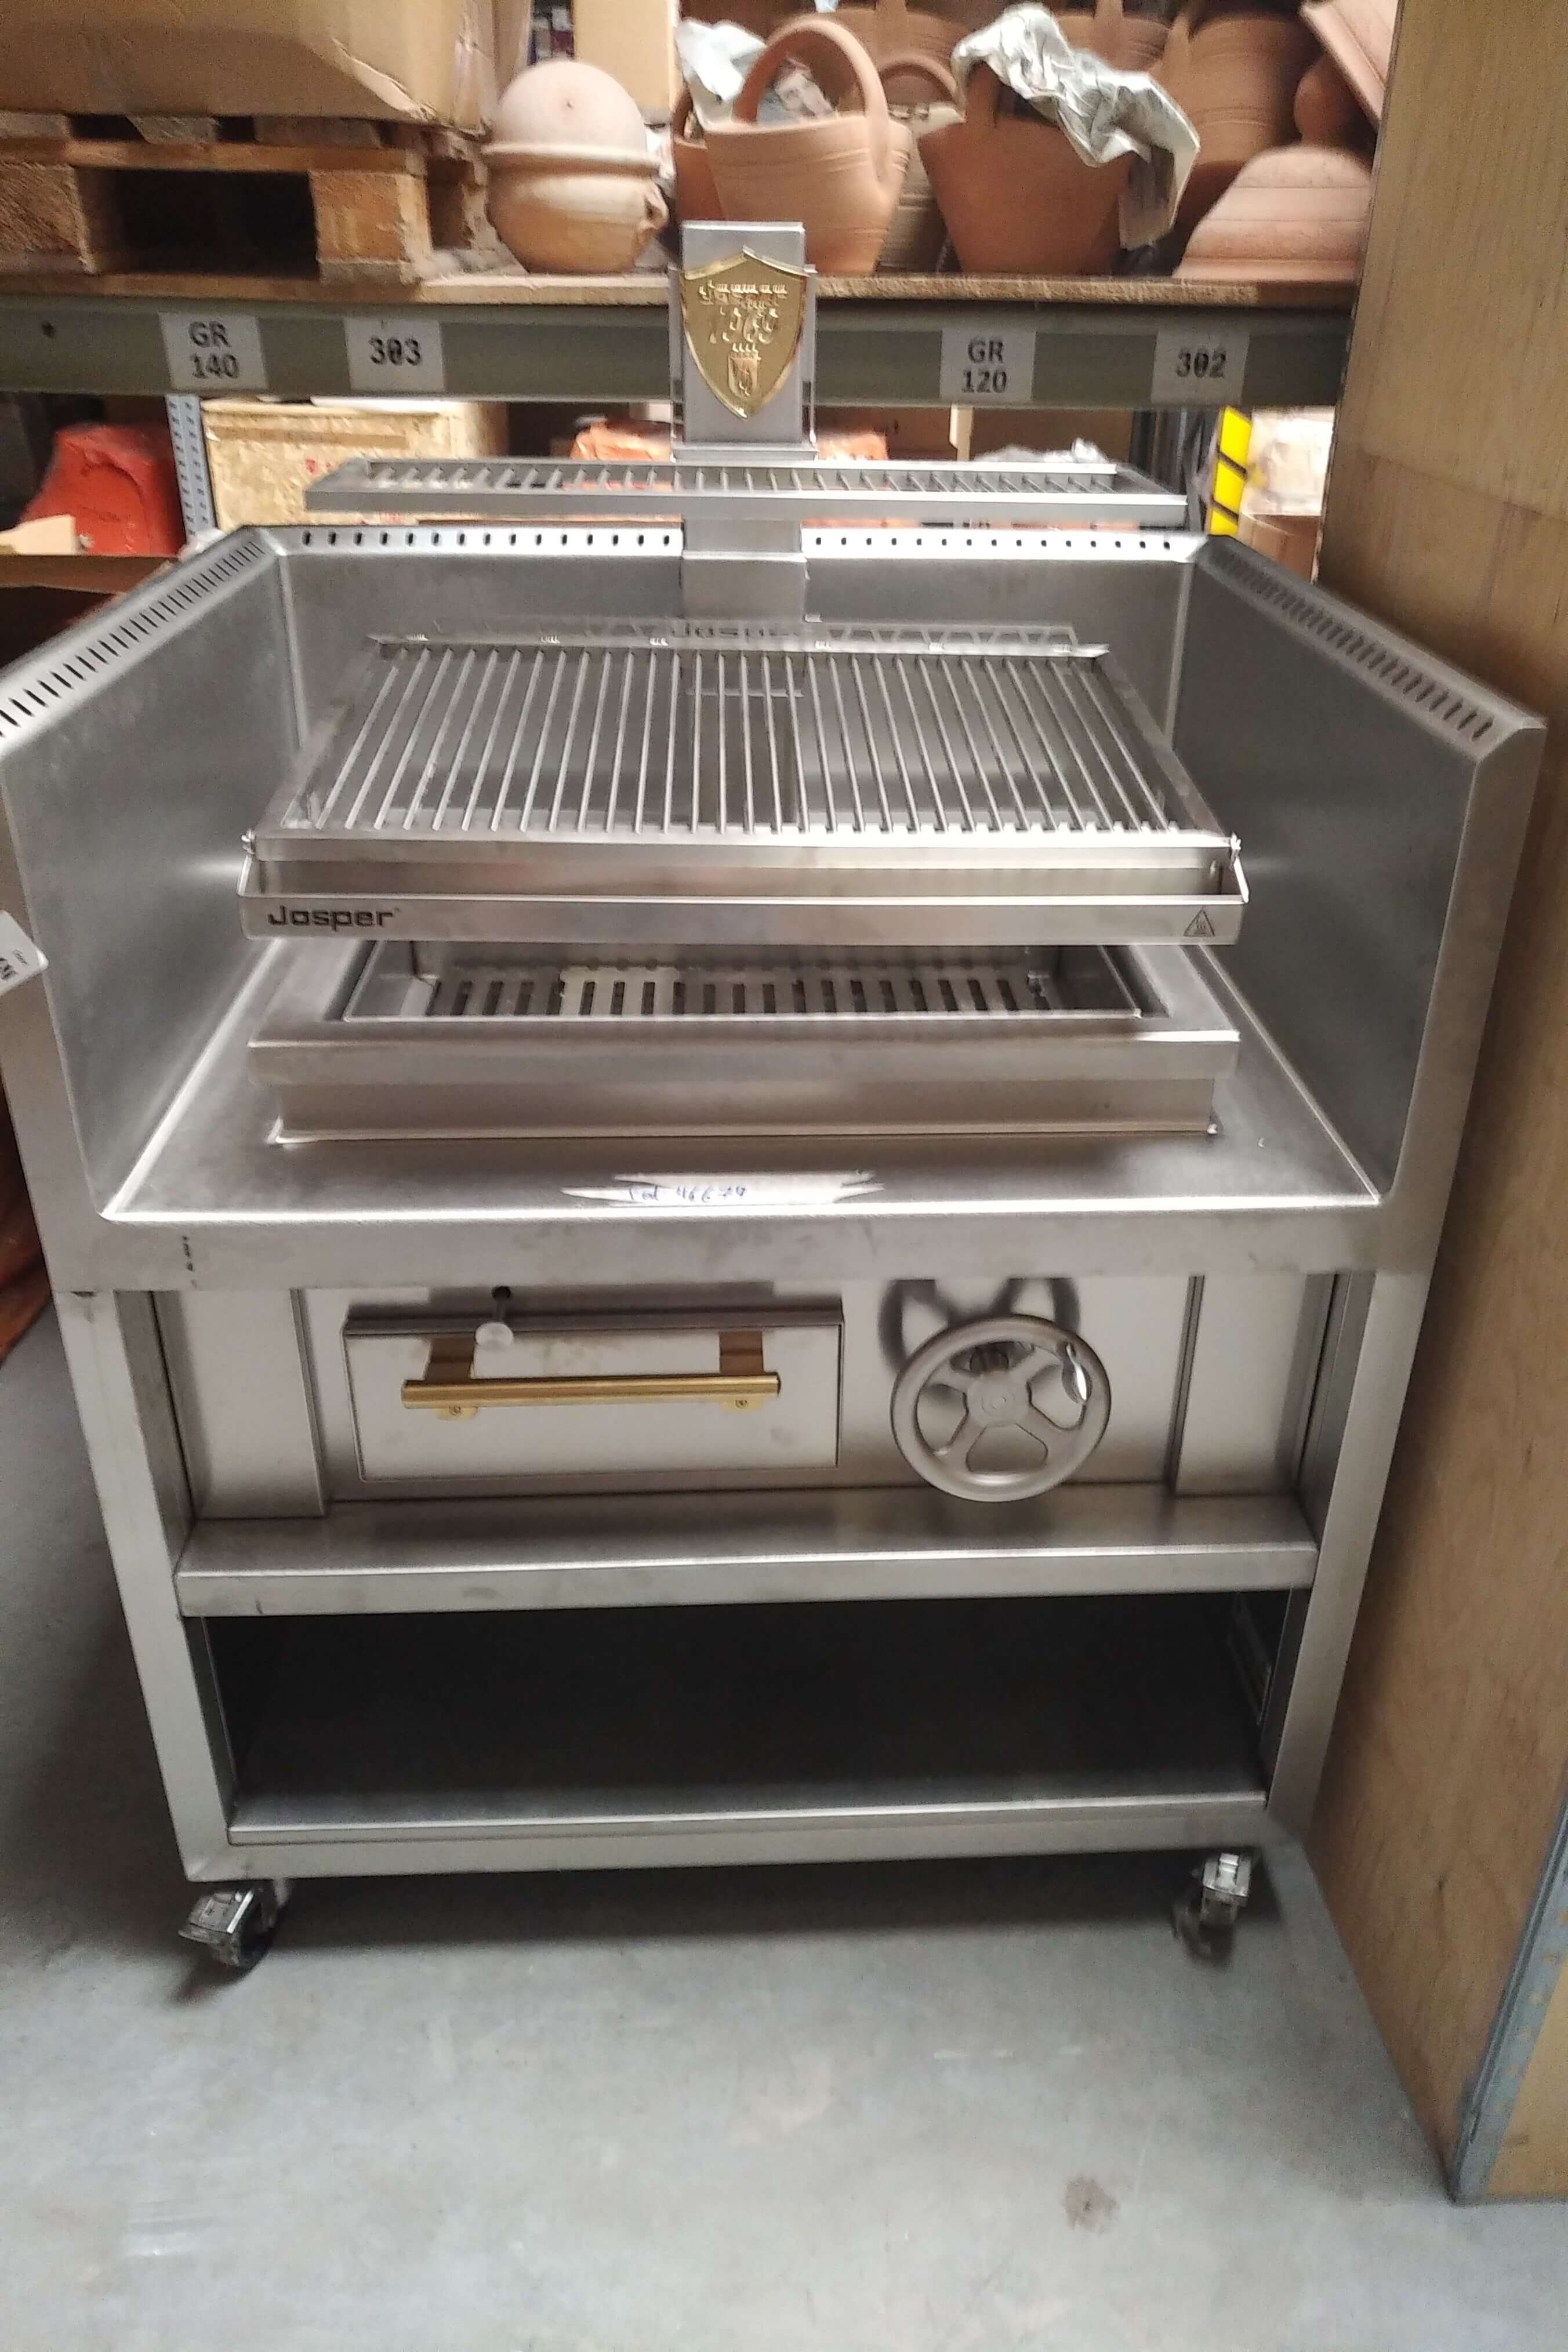 Basque grill from Josper with table, double grill 2x76cm wide